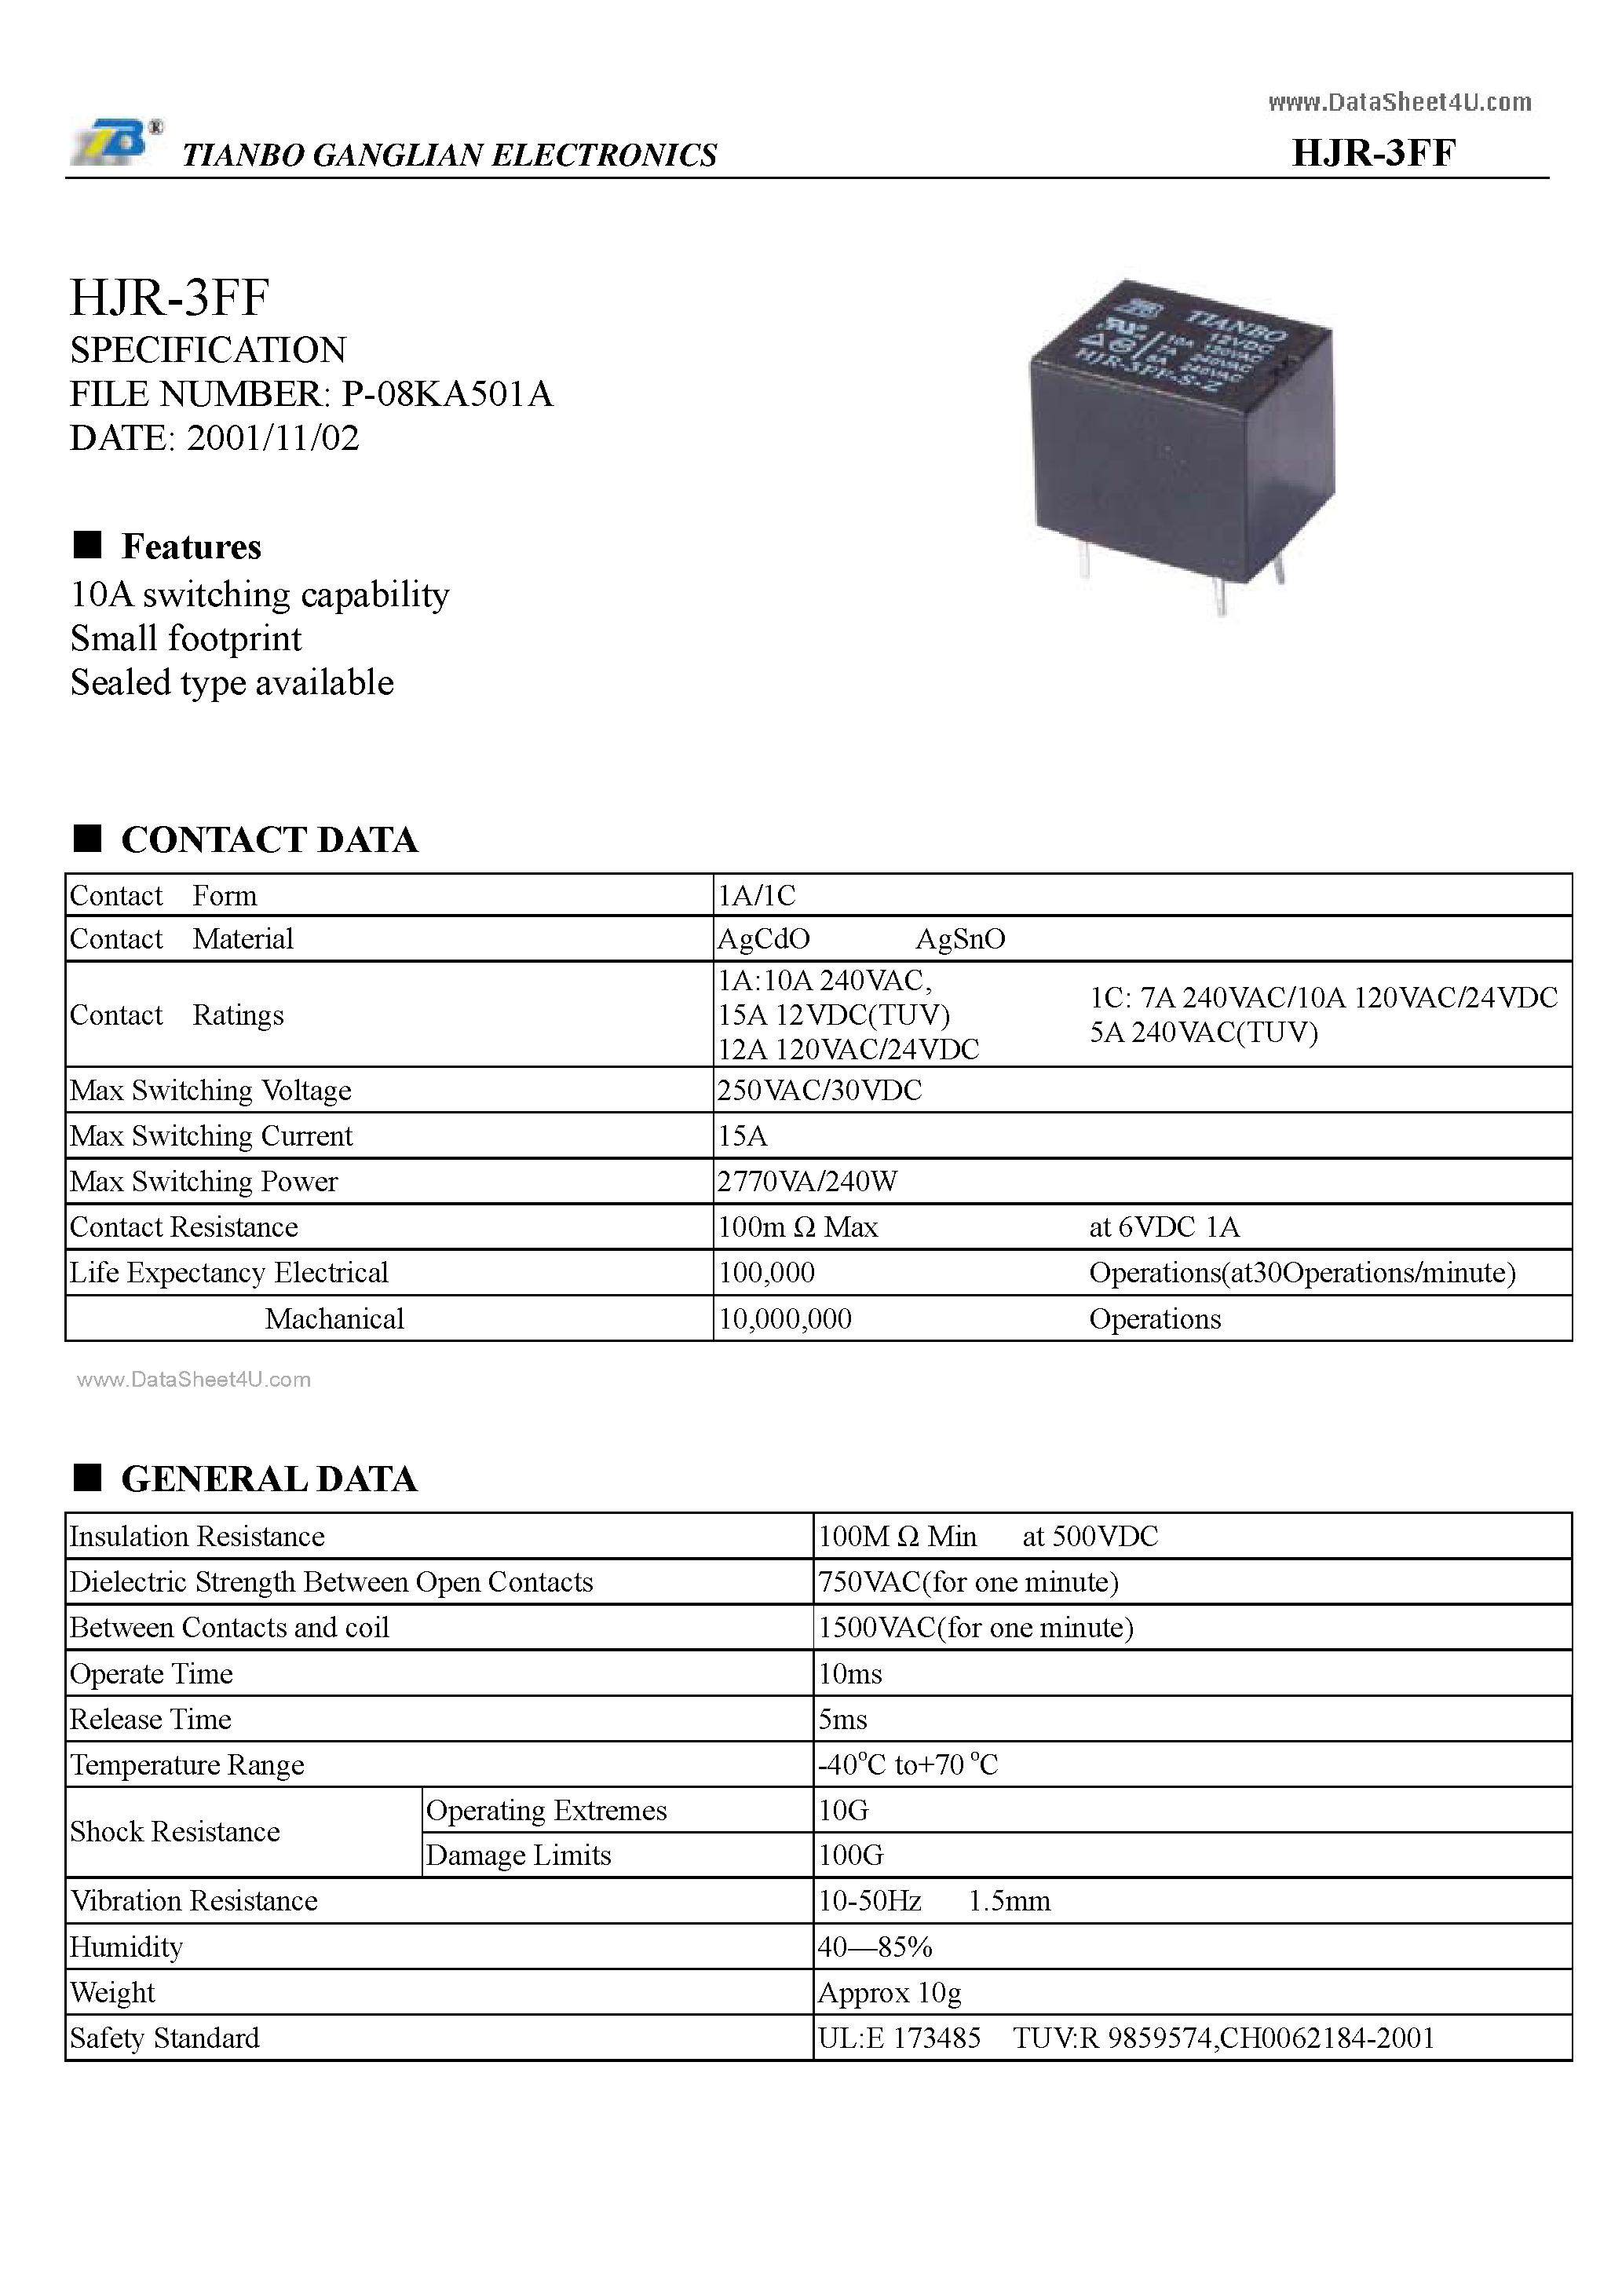 Datasheet HJR-3FF - 10A switching capability page 1